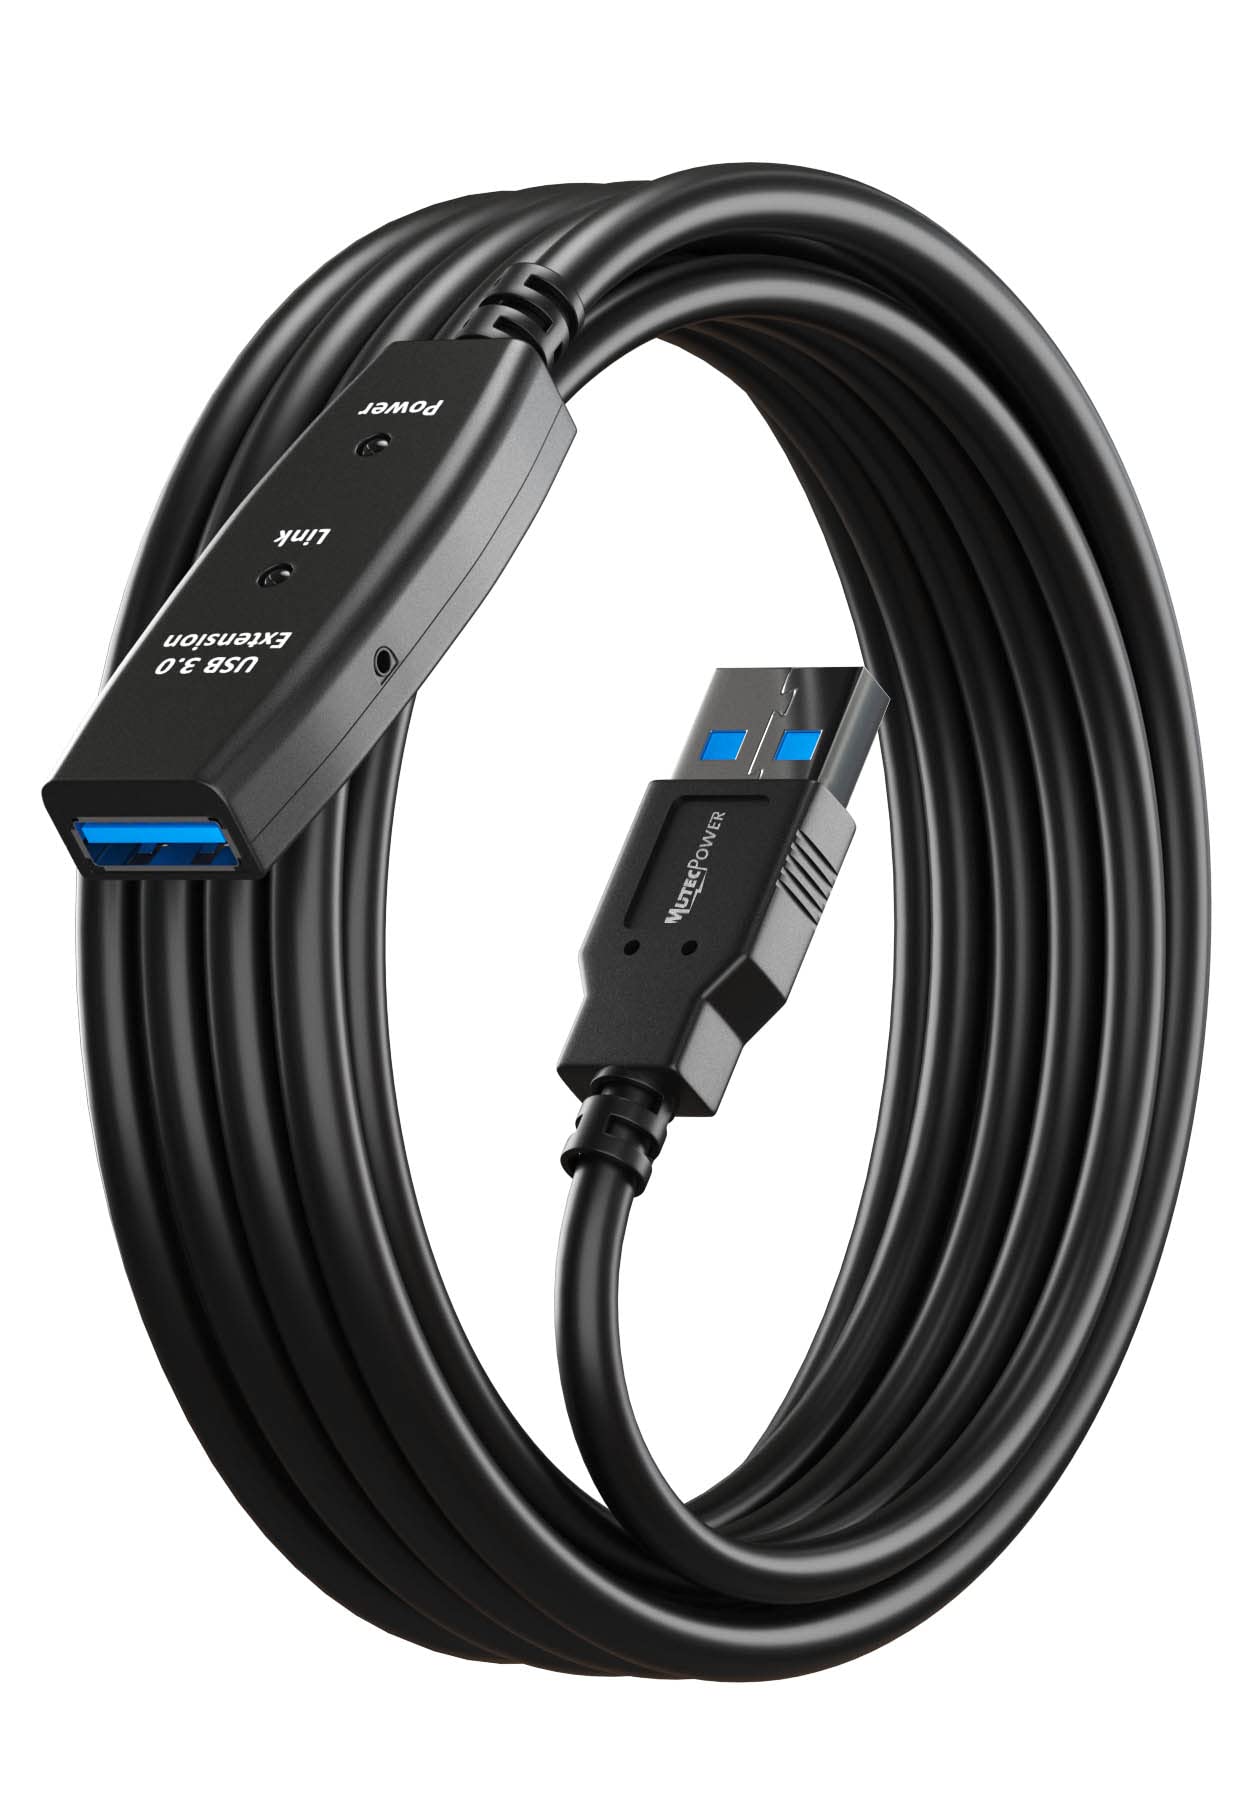 MutecPower 24 Feet Active USB Extension Cable 3.0 Male to Female with A Extension chipset Signal Booster - Active Extension/Repeater Cord 7.5 Meters / 24 Feet